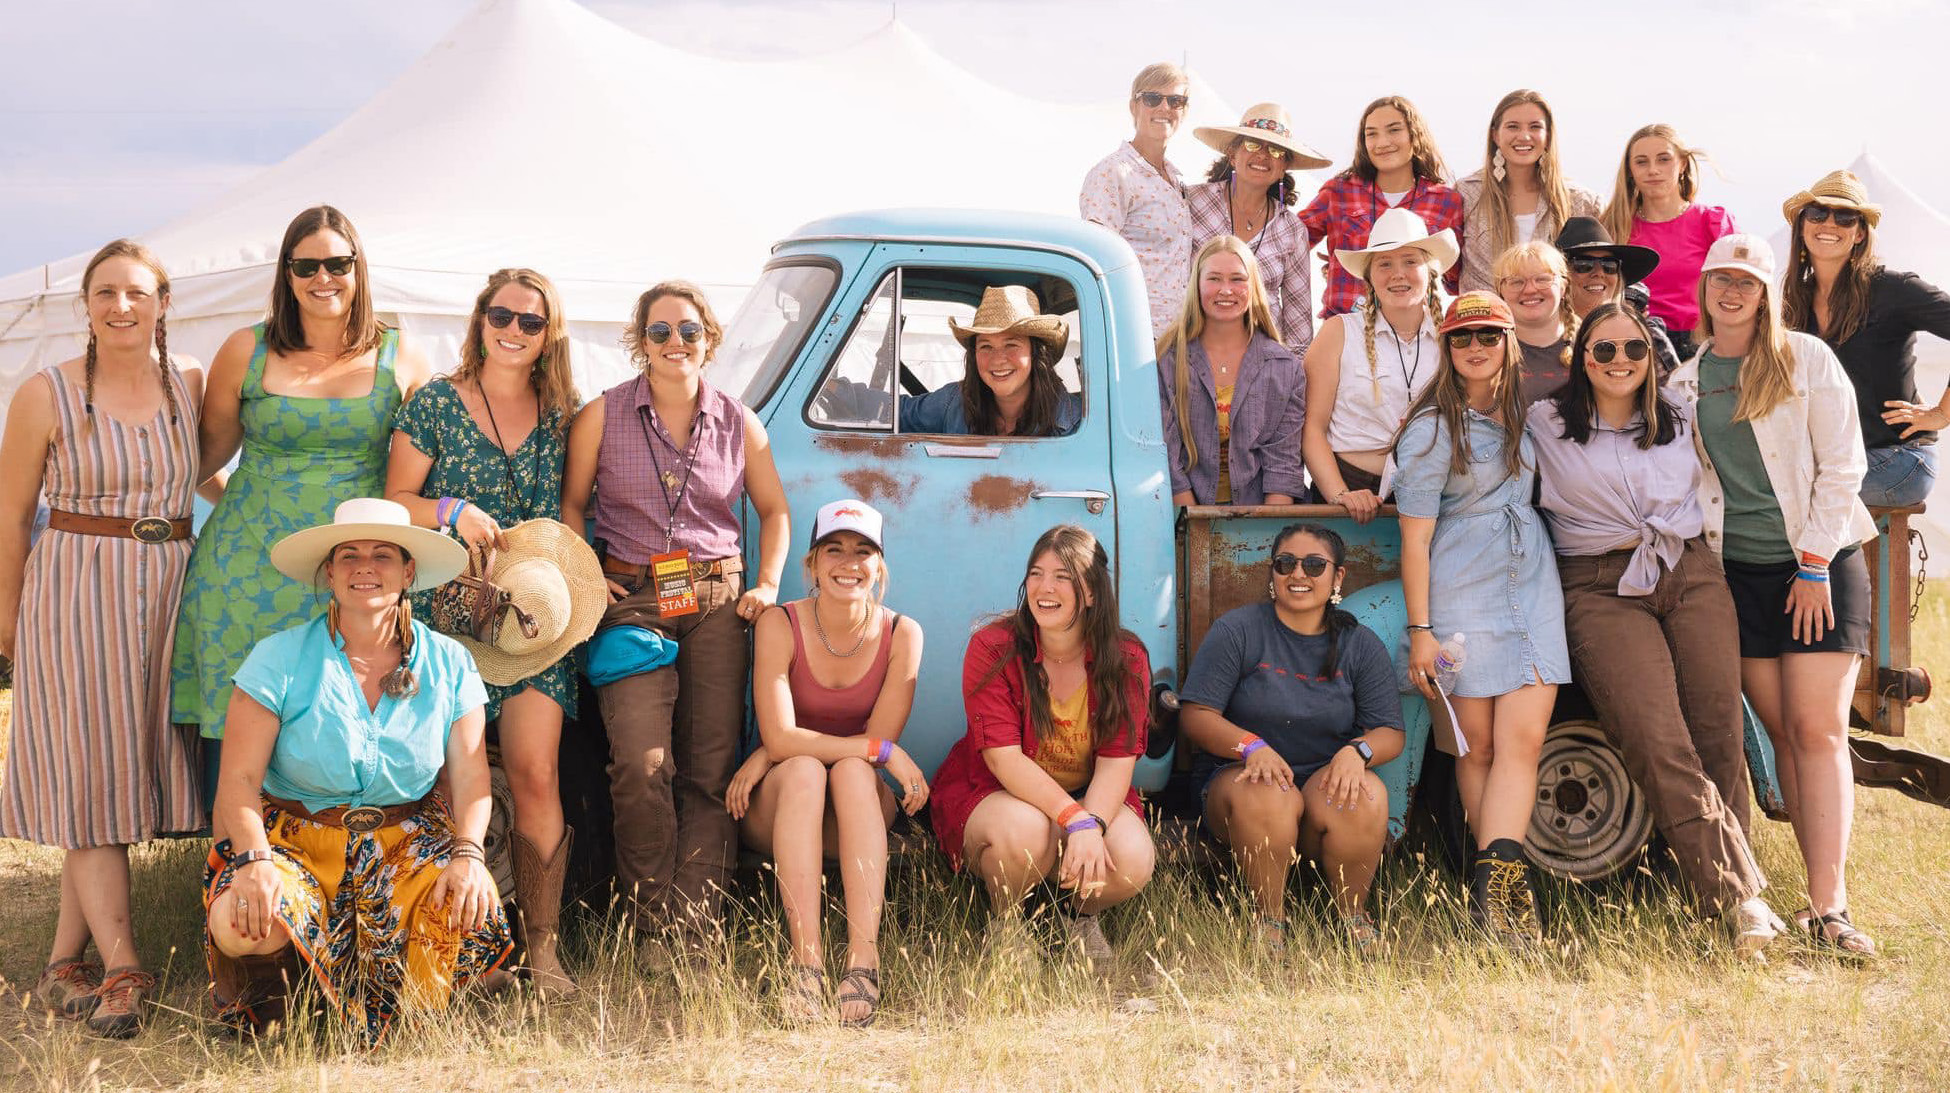 Large group of women surrounding an old blue truck looking happy.